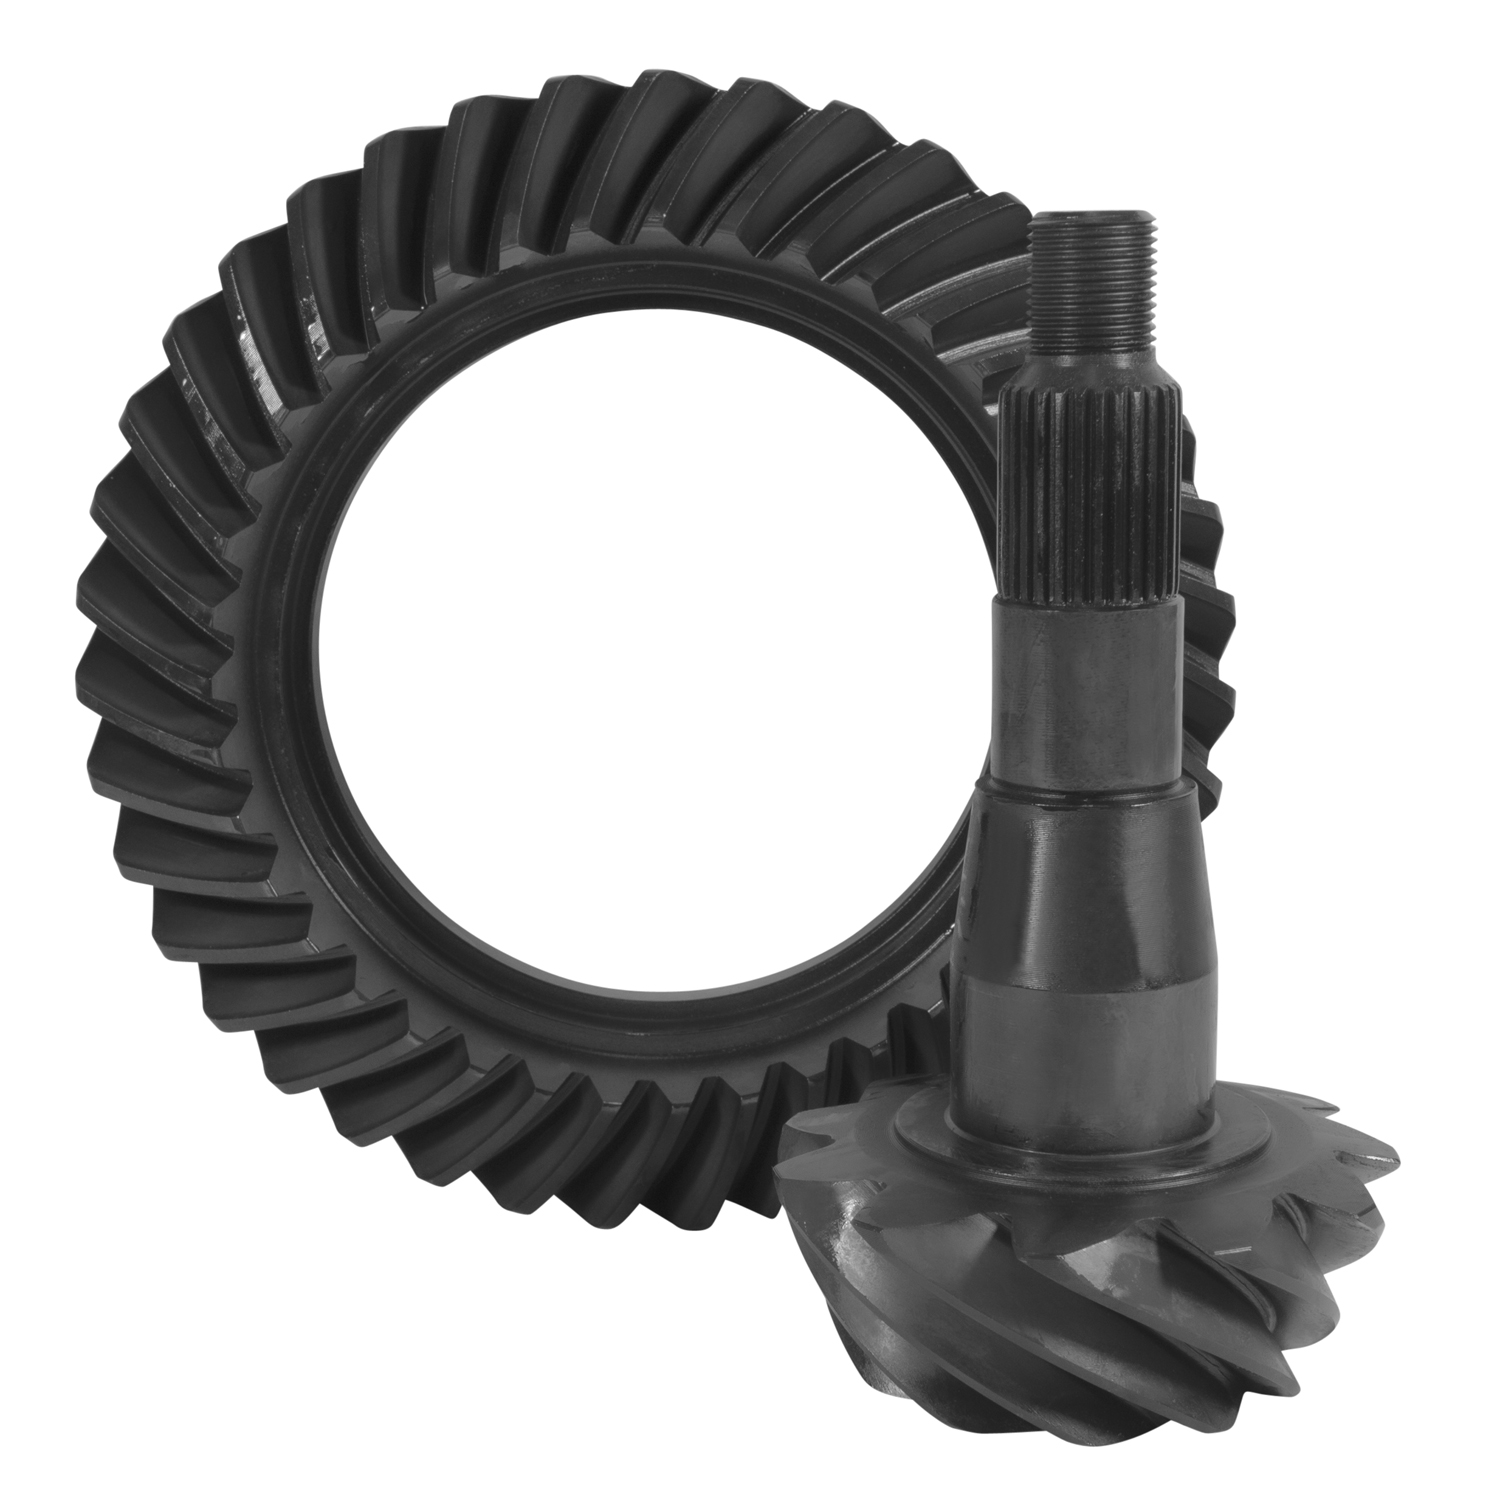 USA Standard Ring & Pinion gear set for '11 & up Chrysler 9.25 ZF, 4.11 ratio